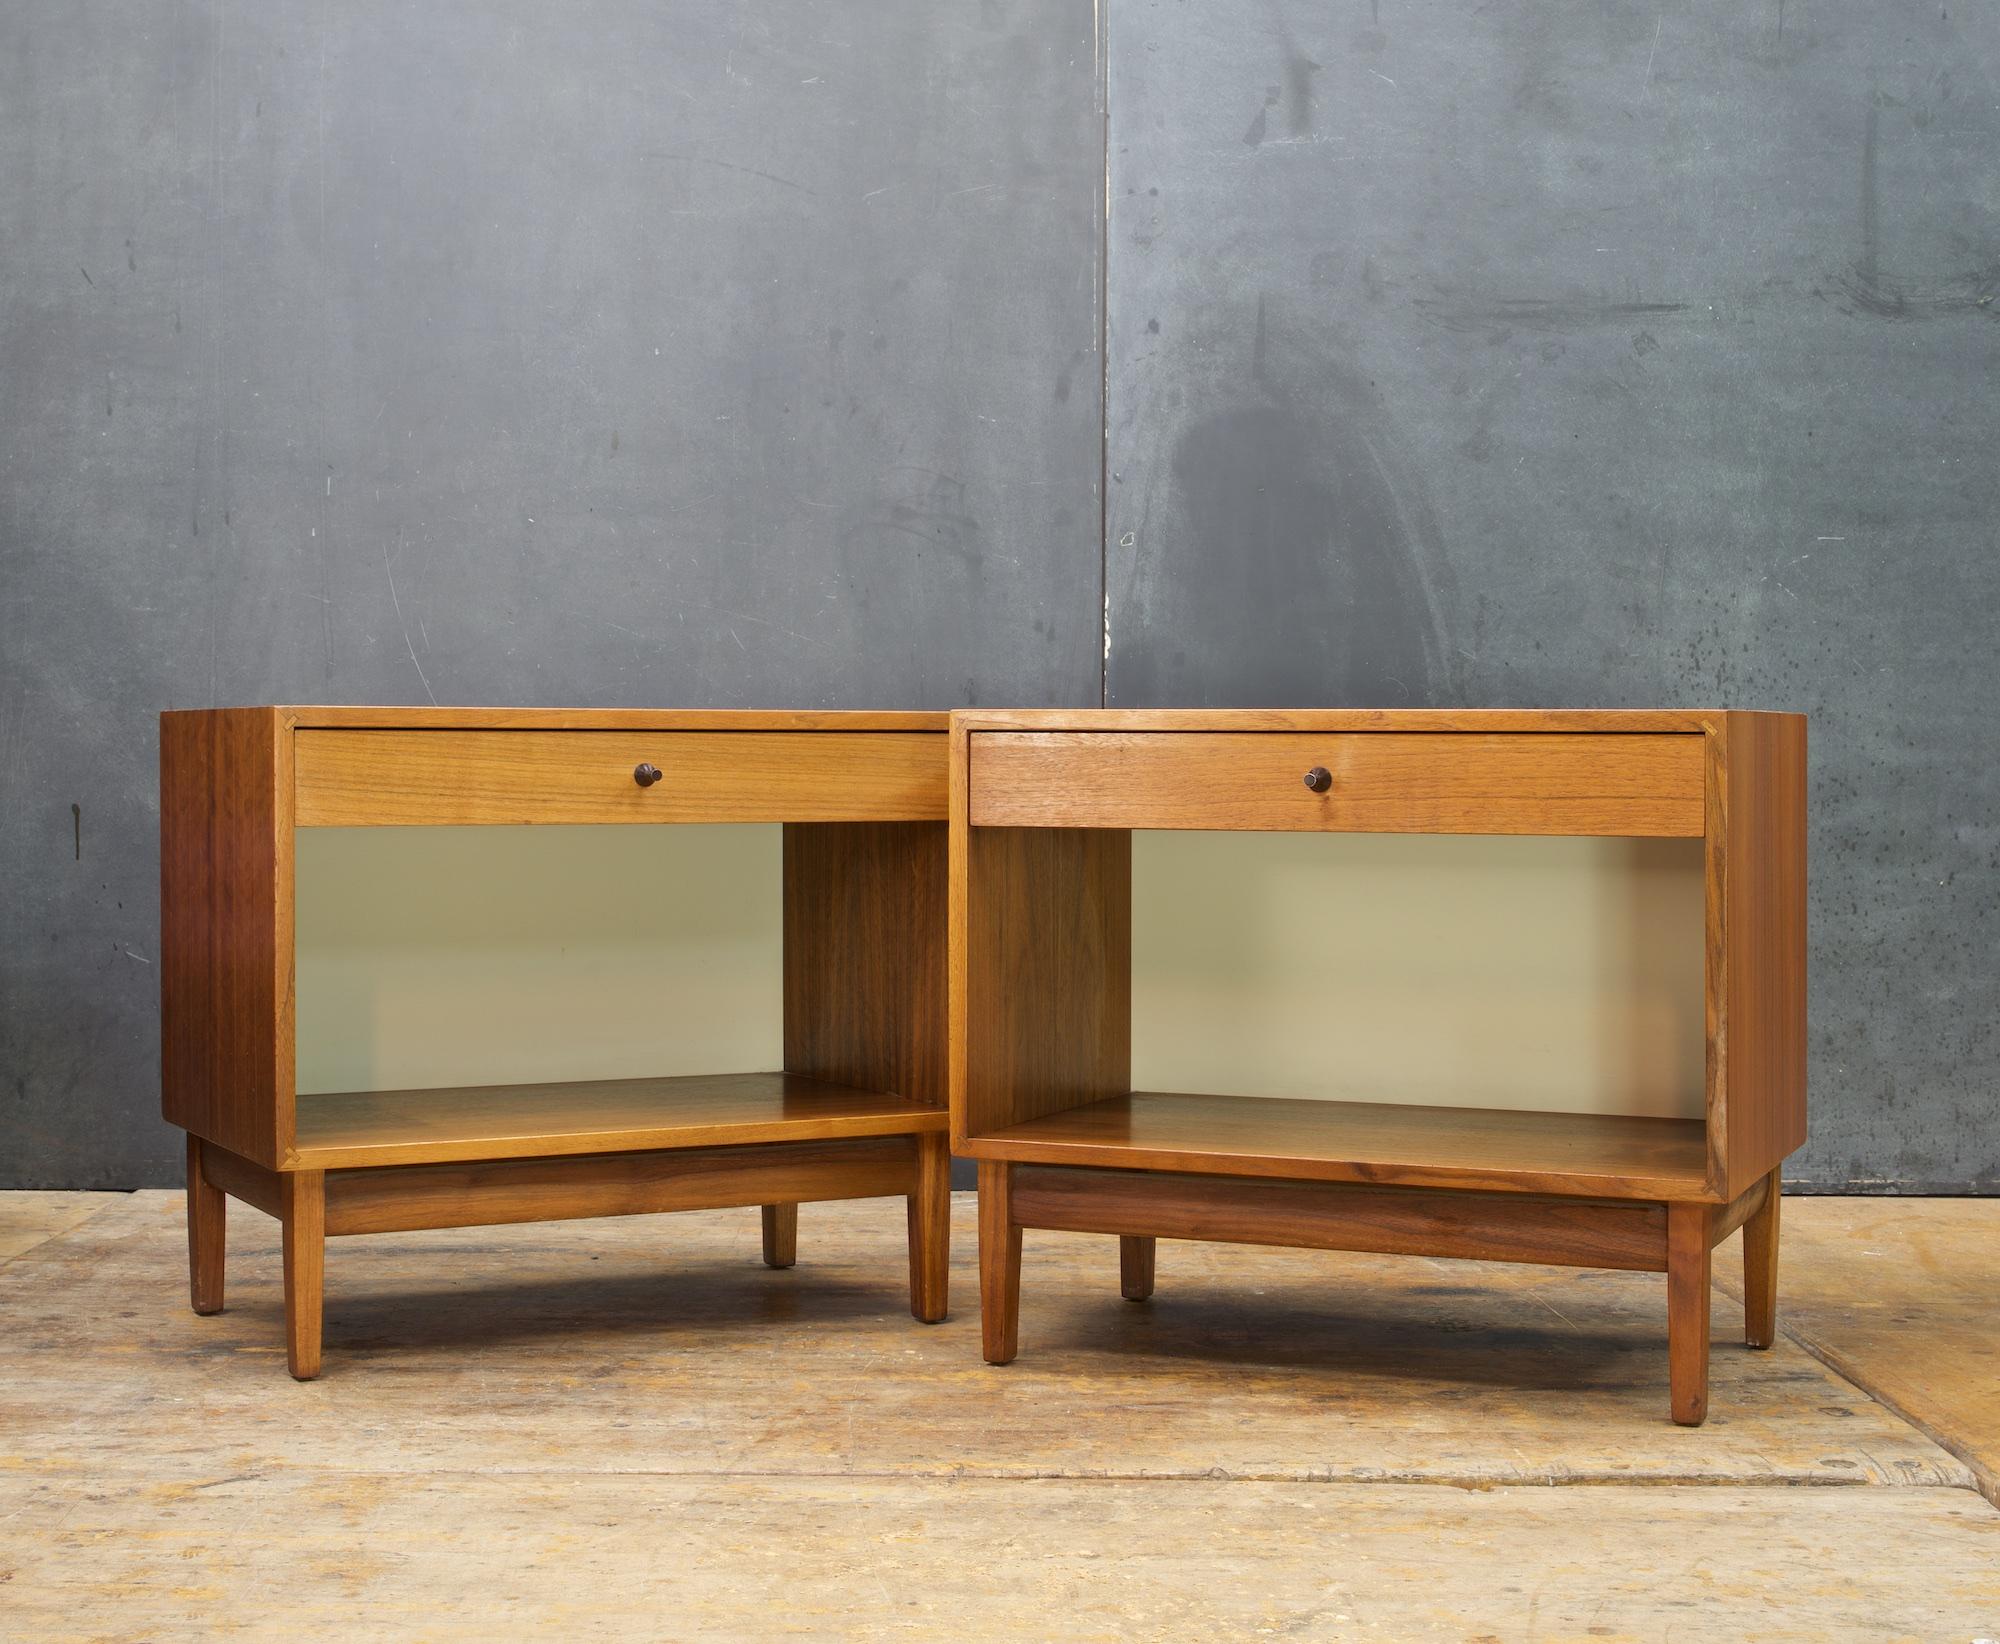 Matching Pair of oiled walnut nightstands designed by Kipp Stewart for Calvin Furniture's American Design Foundation line. Rare design, with wonderful a nice White interior back surface. 

One top has a dark area, stained very dark.

Measures:
W: 24